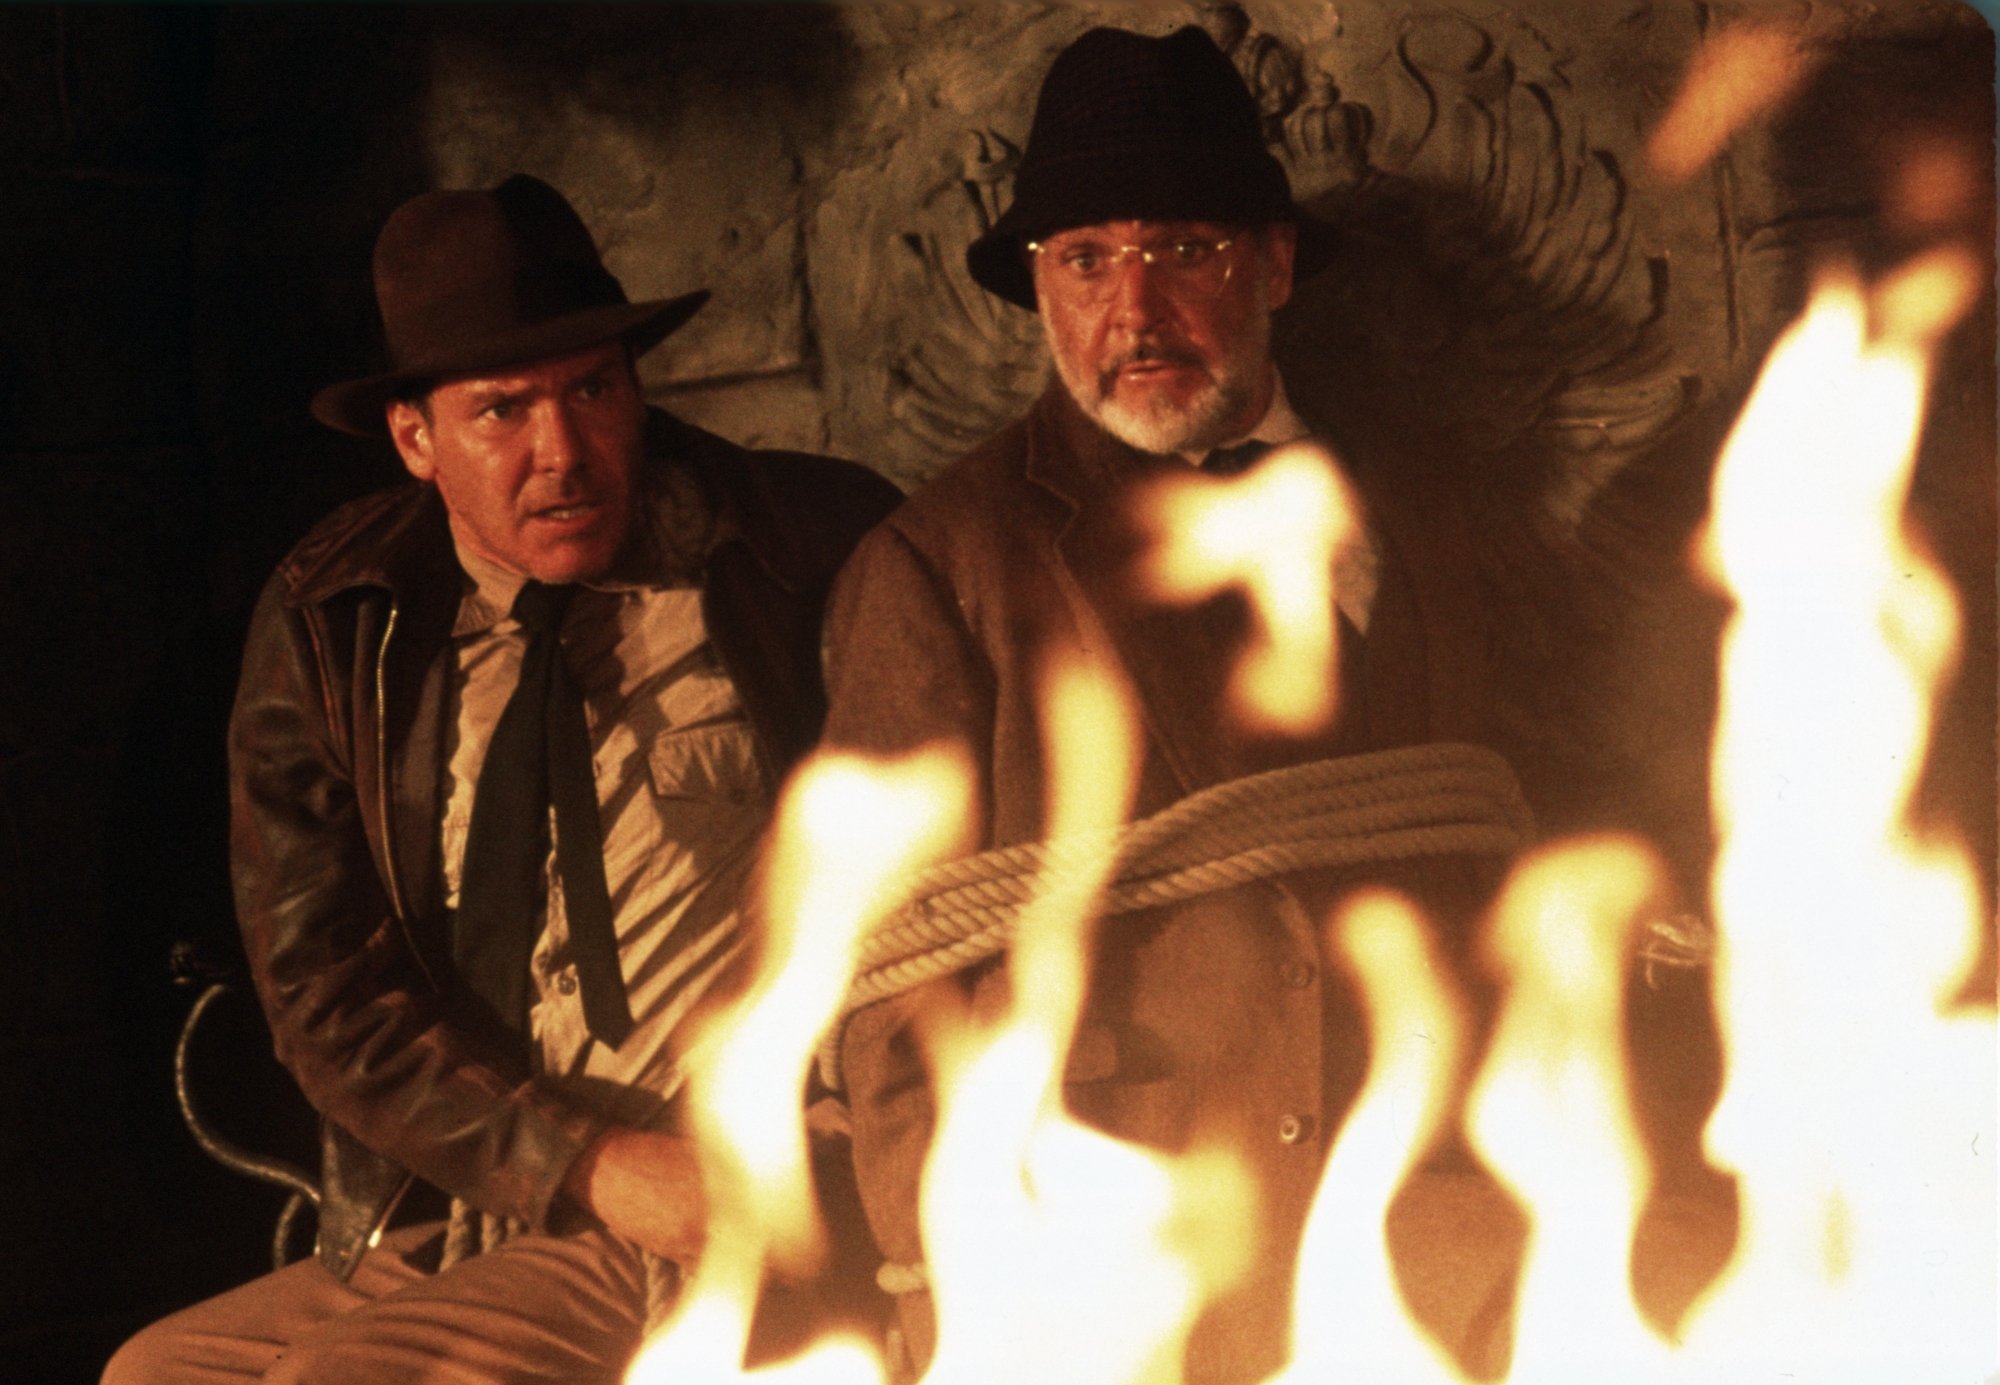 'Indiana Jones and the Last Crusade' Harrison Ford as Indiana Jones and Sean Connery as Henry Jones, Sr. looking panicked in front of a fire with Connery tied up in ropes